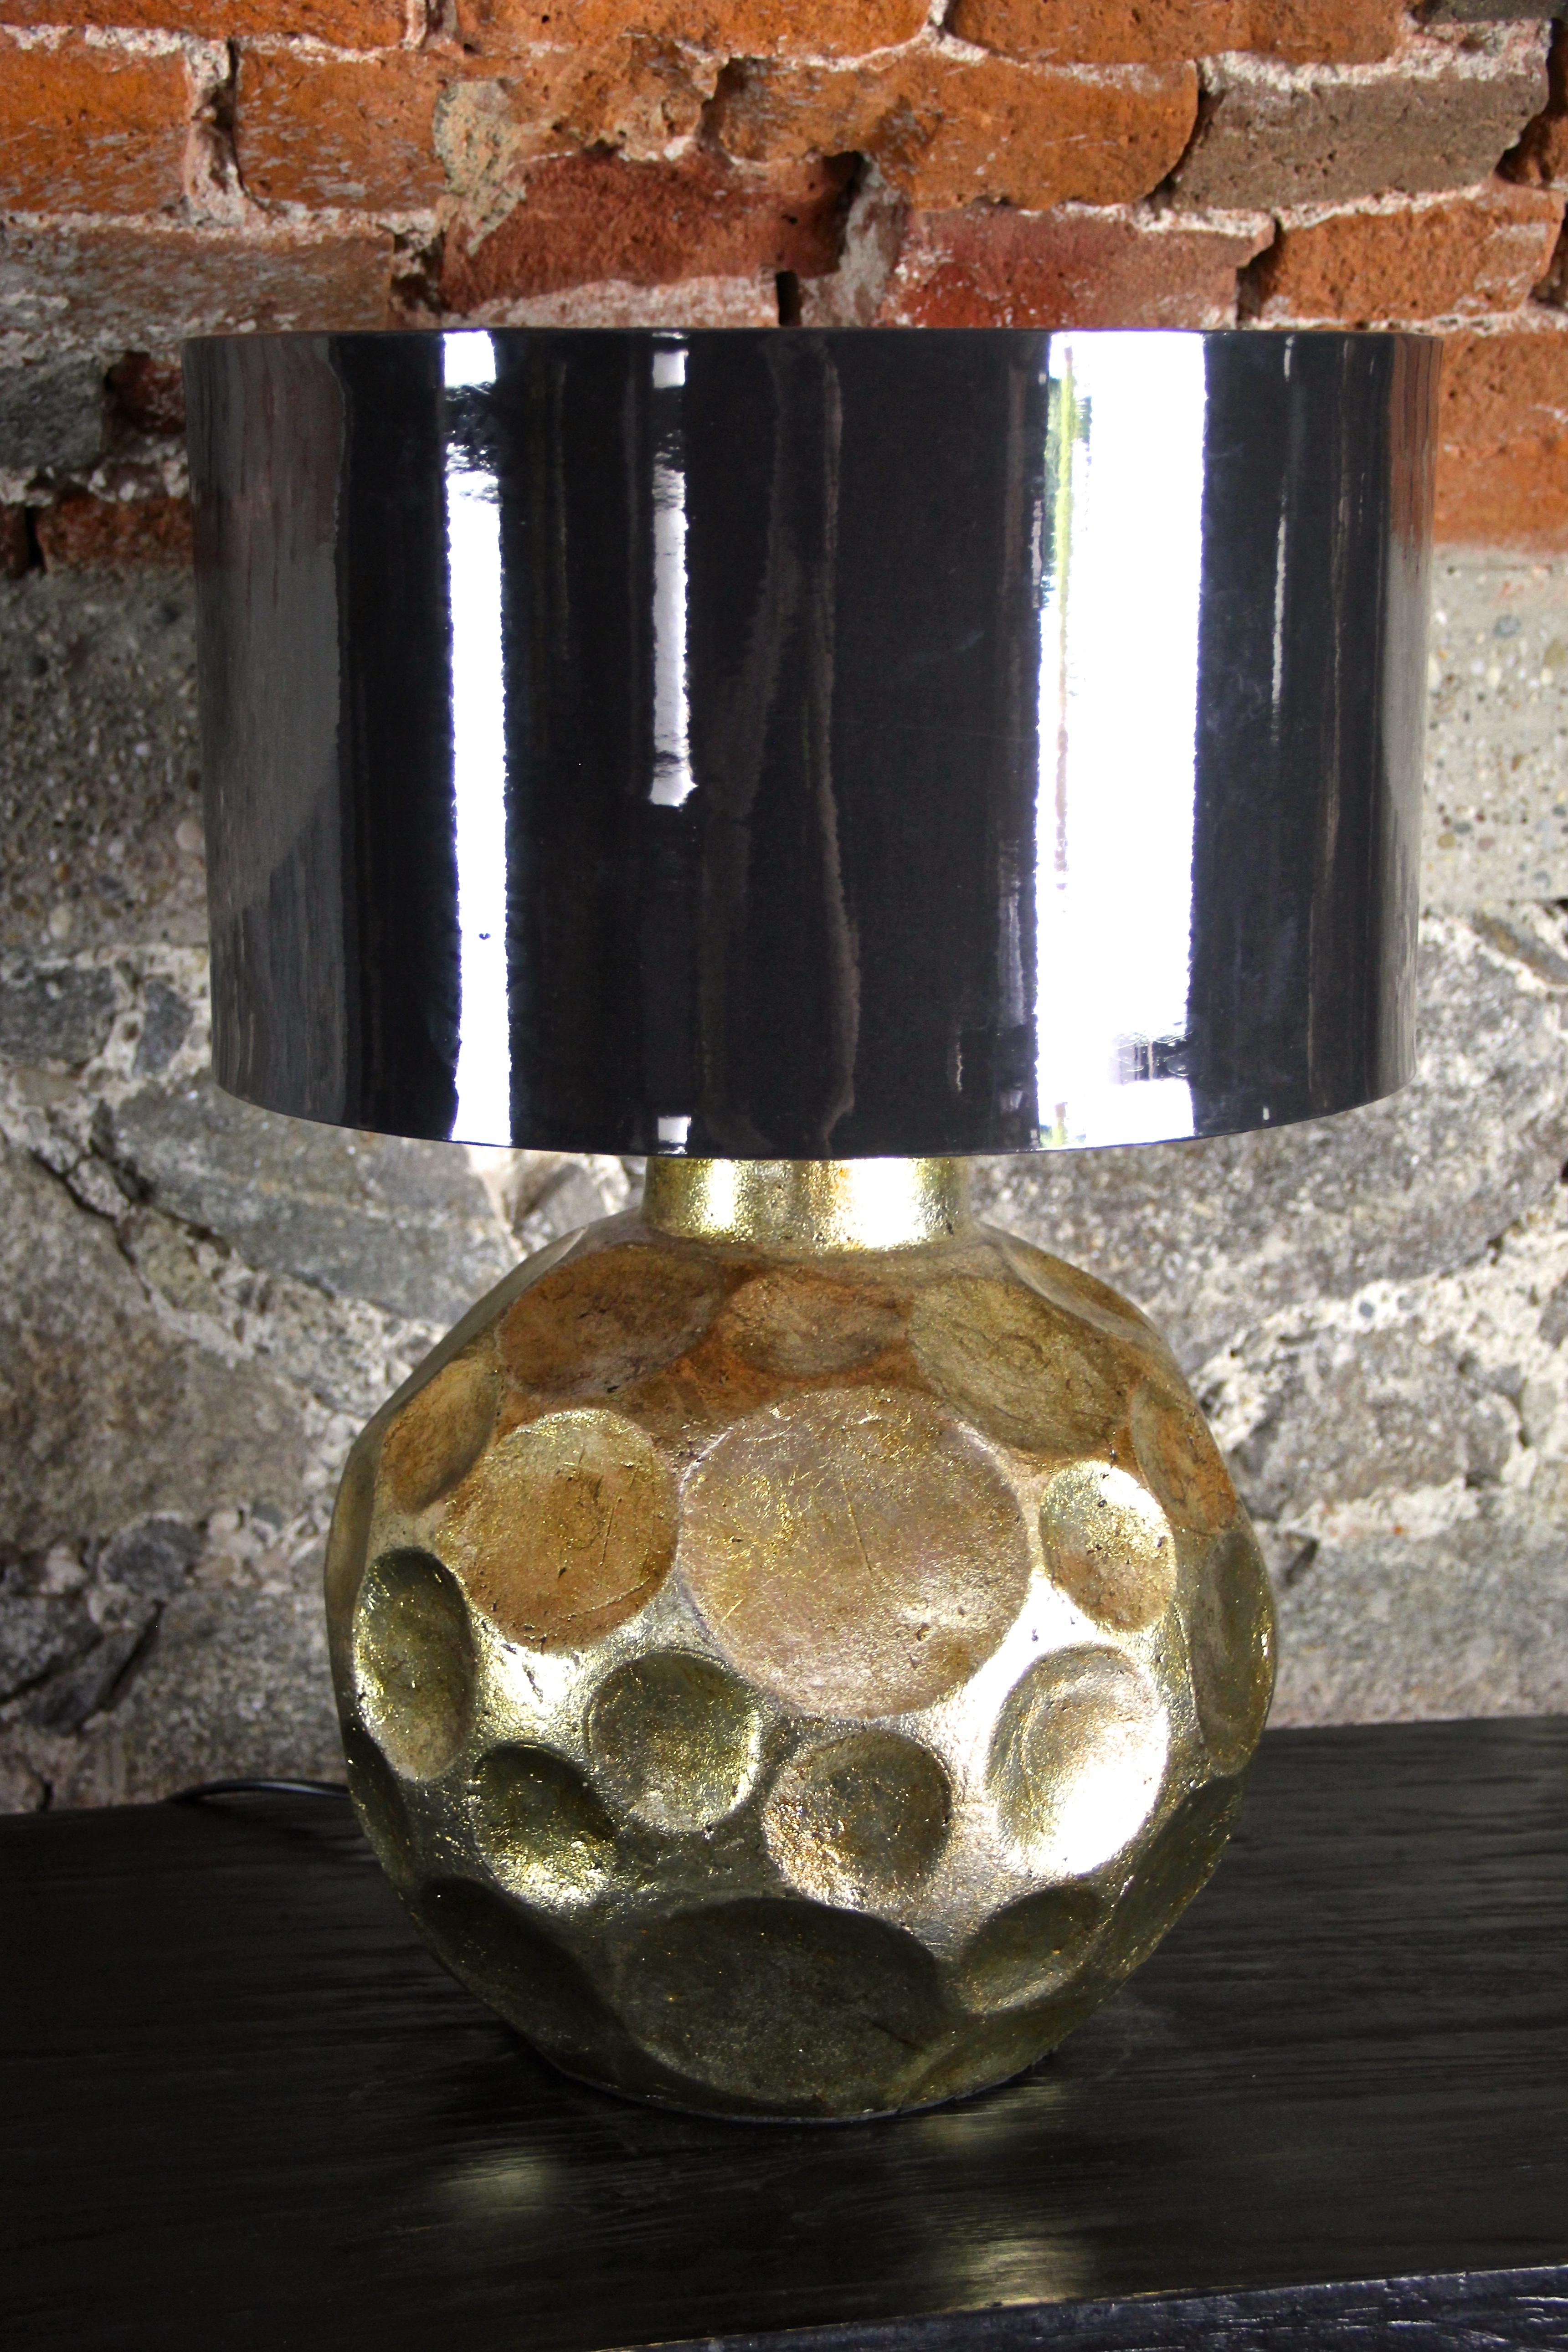 Decorative contemporary golden glazed ceramic table lamp. The great designed bulby ceramic body reminds on irregular formed honeycombs and shows a warm golden glazed surface, looking like it has a lovely patina. In combination with the dark grey